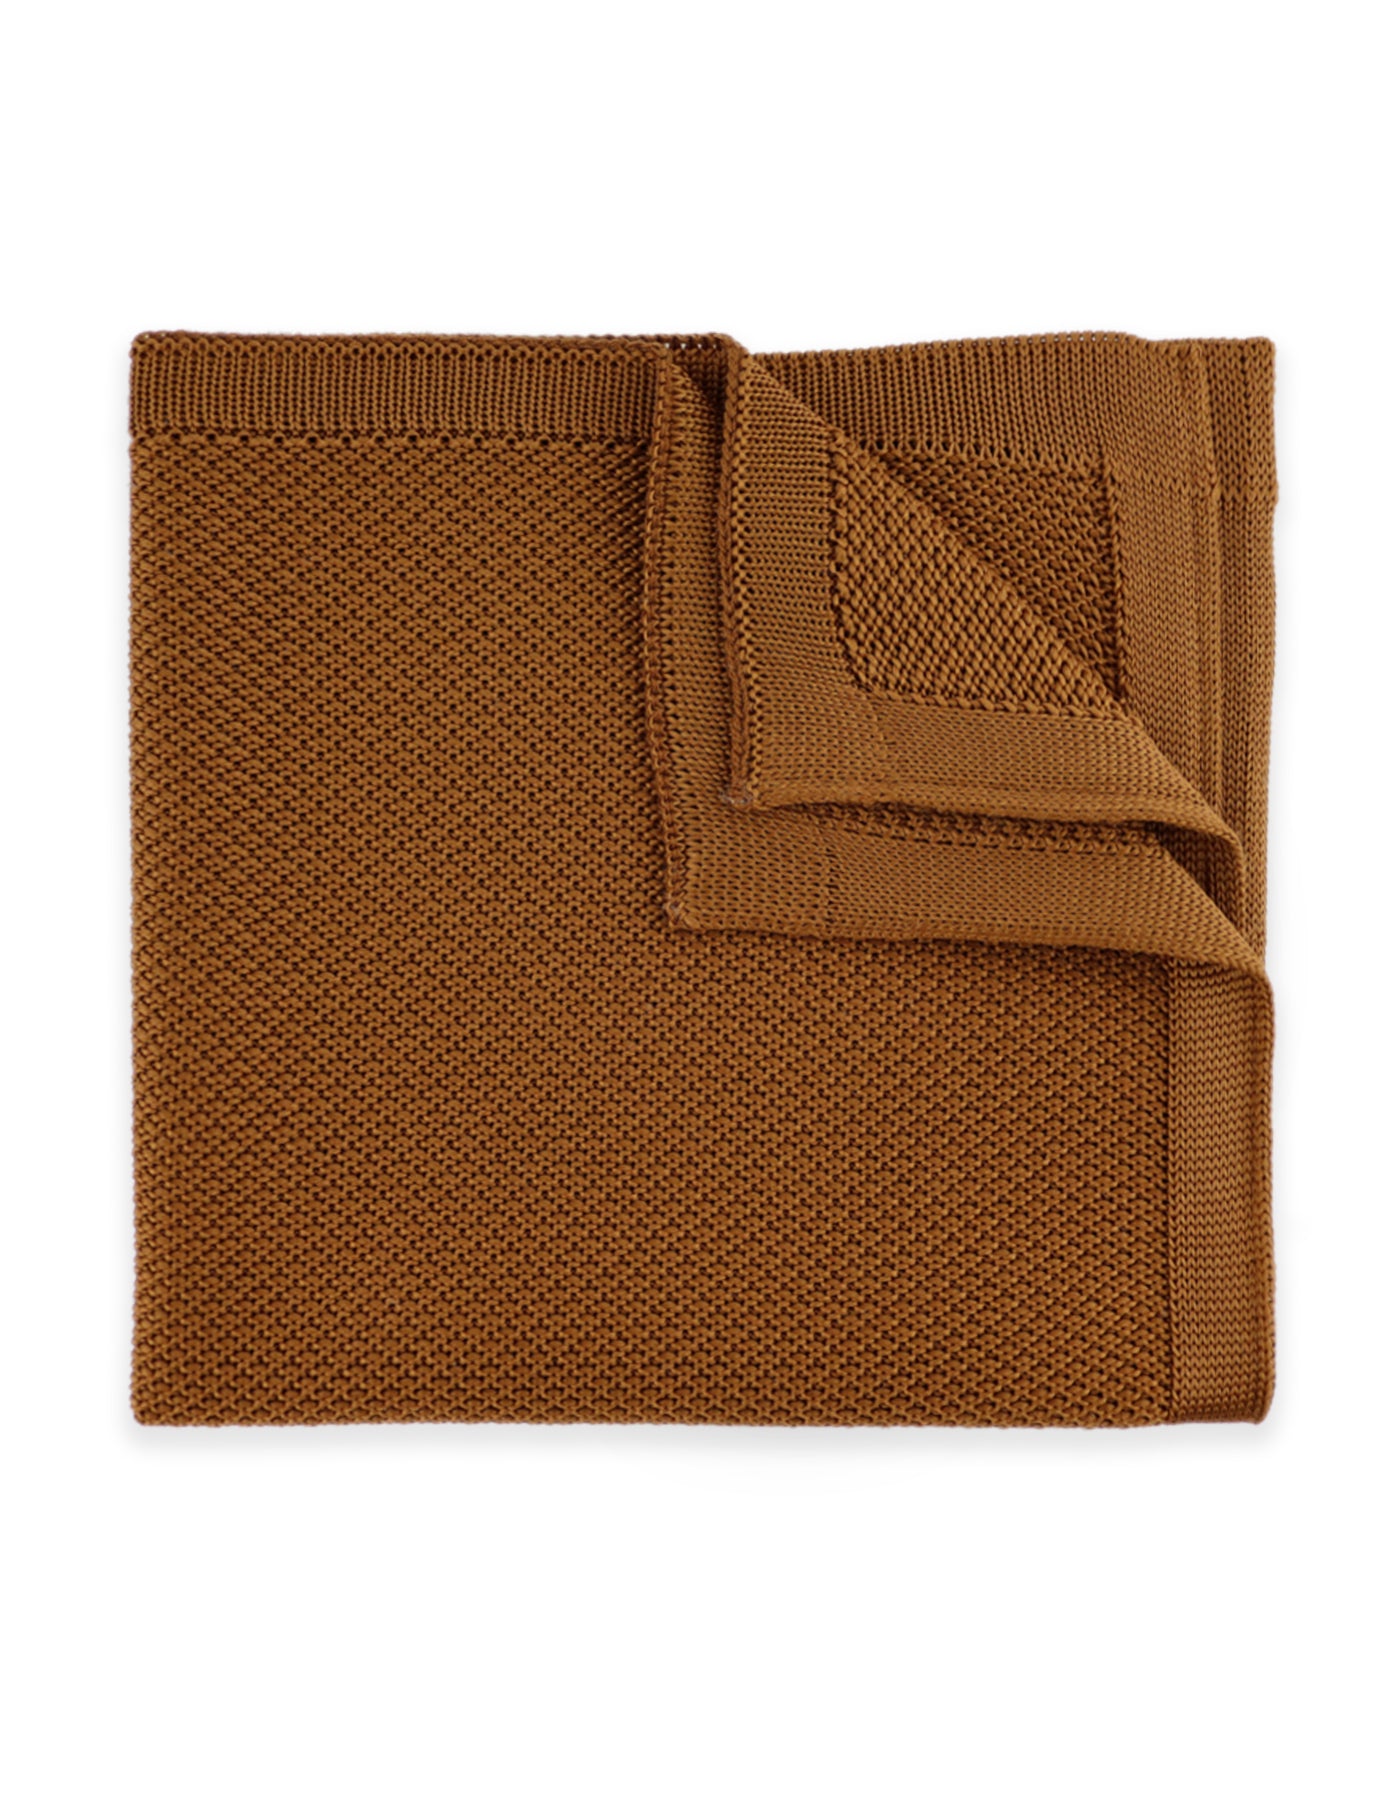 100% Polyester Diamond End Knitted Tie - Caramel Brown